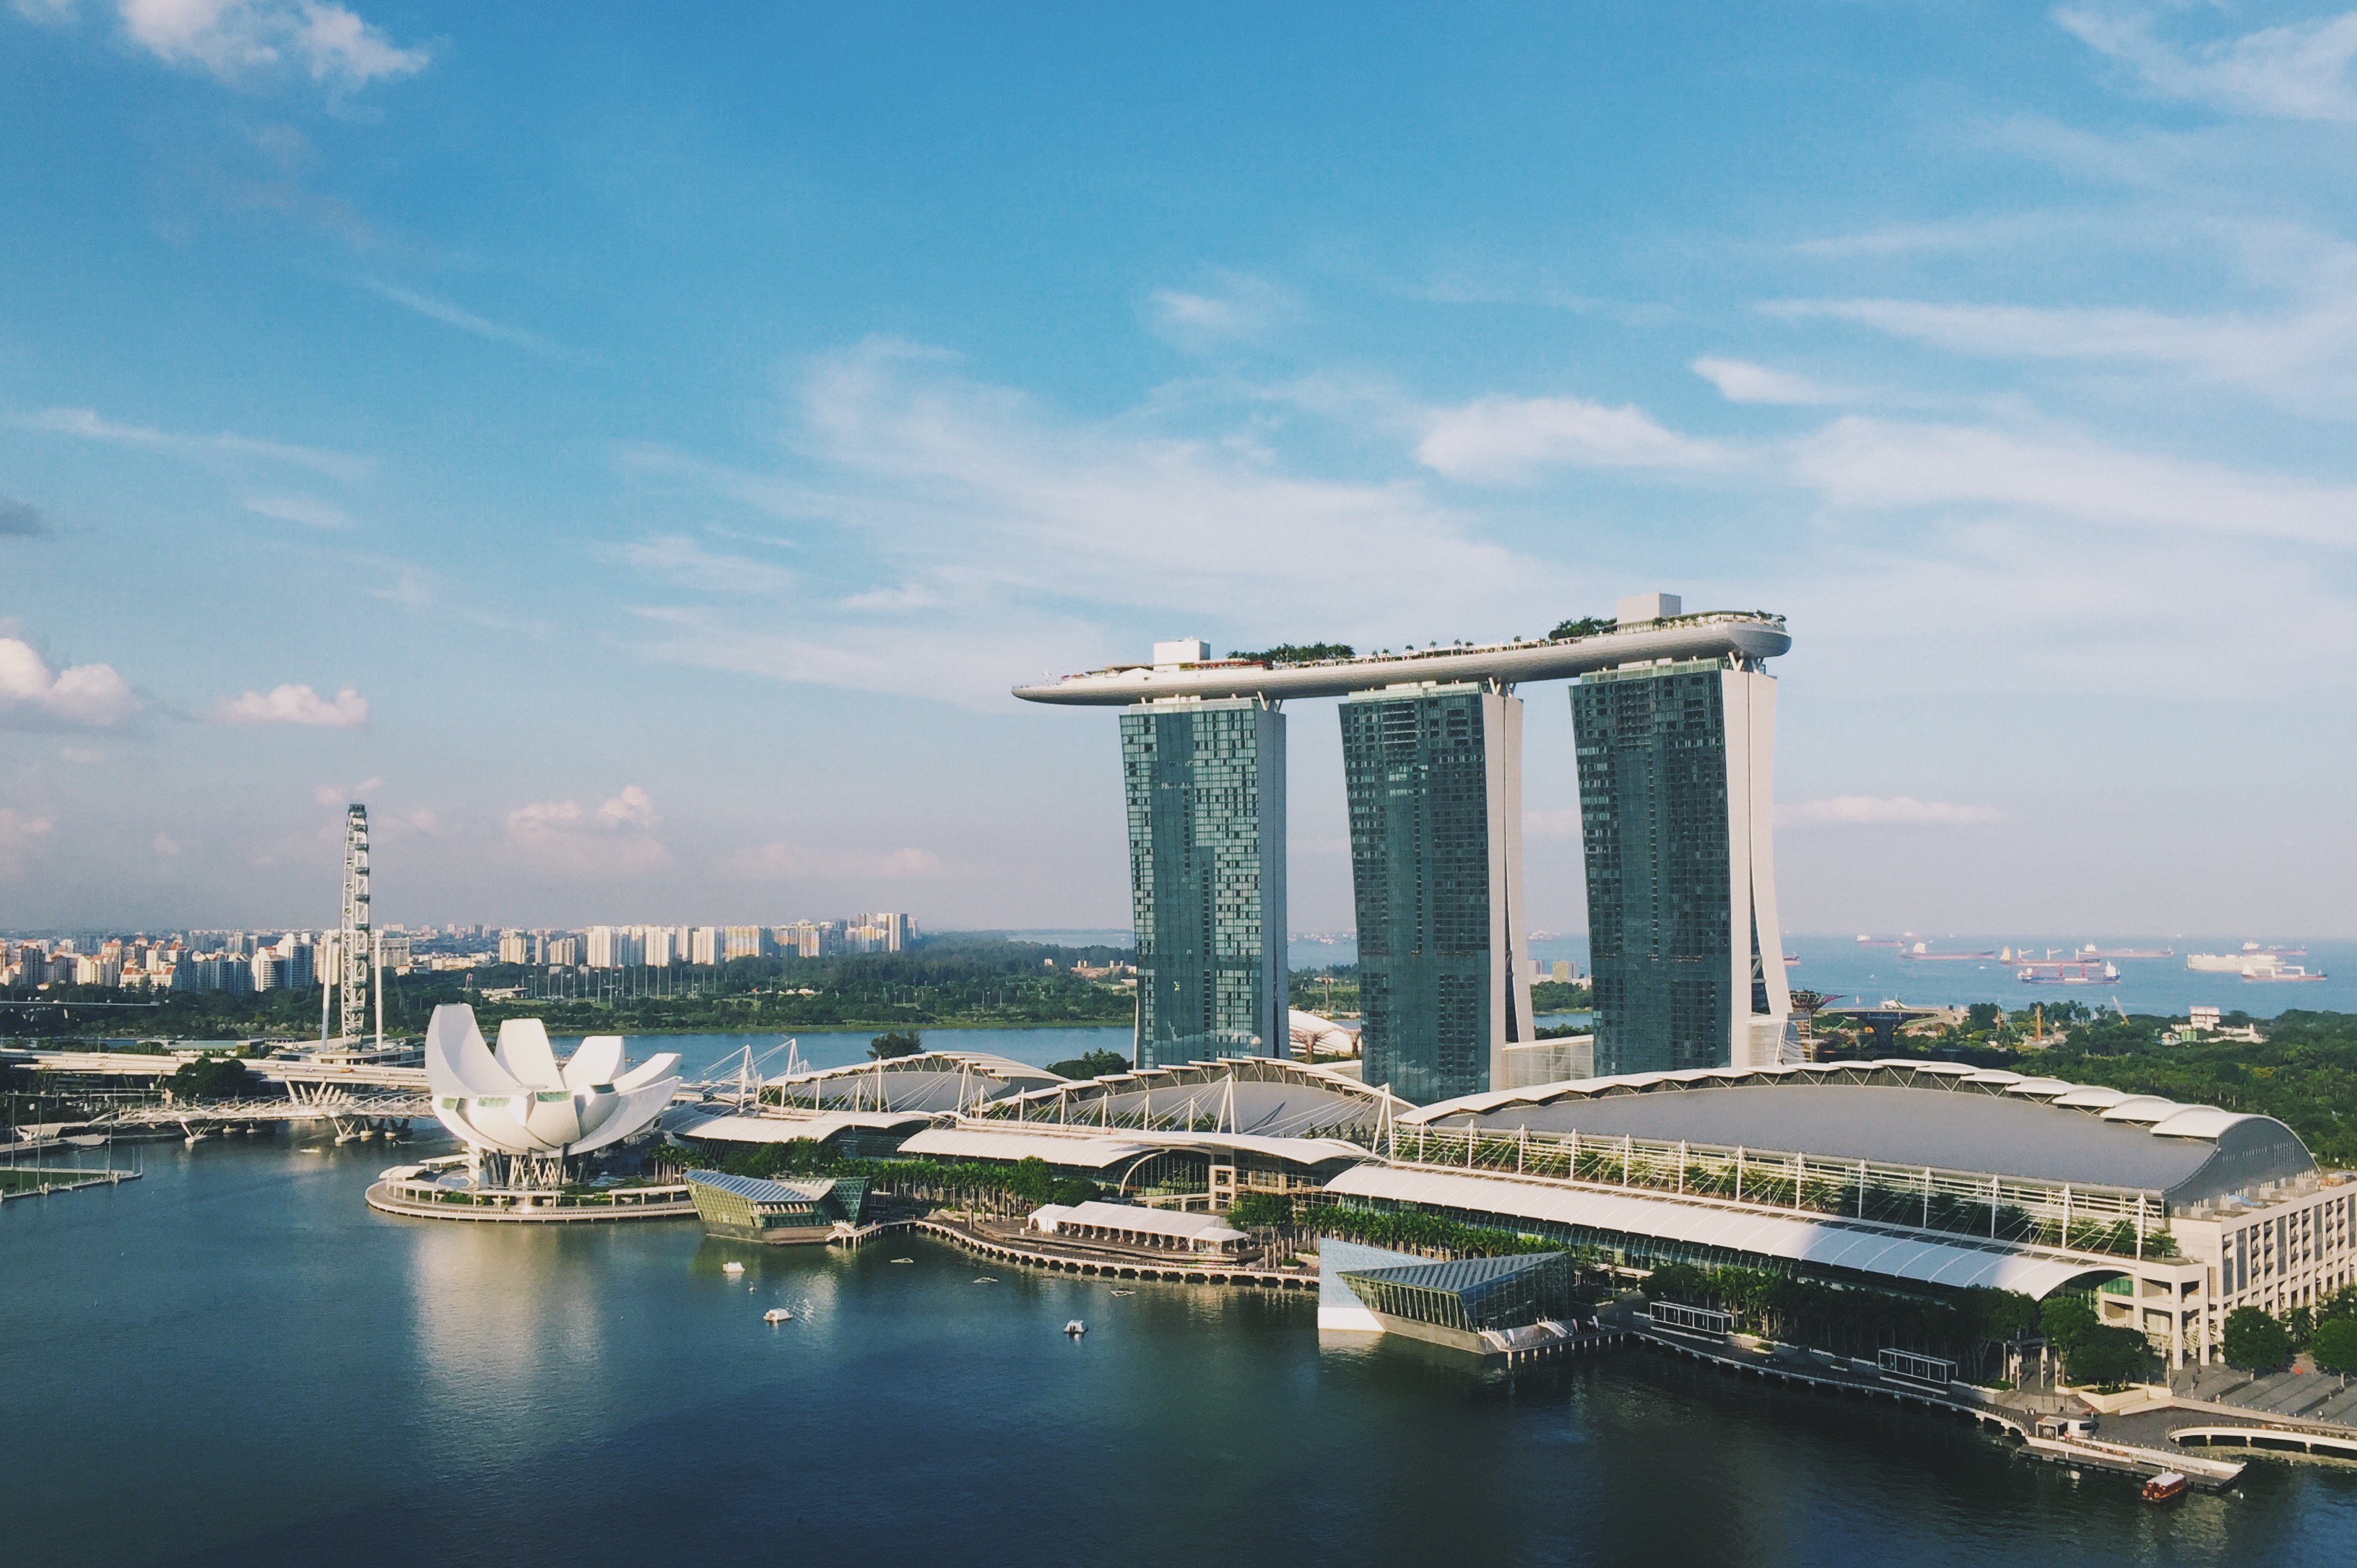 Singapore Is More Scenic With Cruise